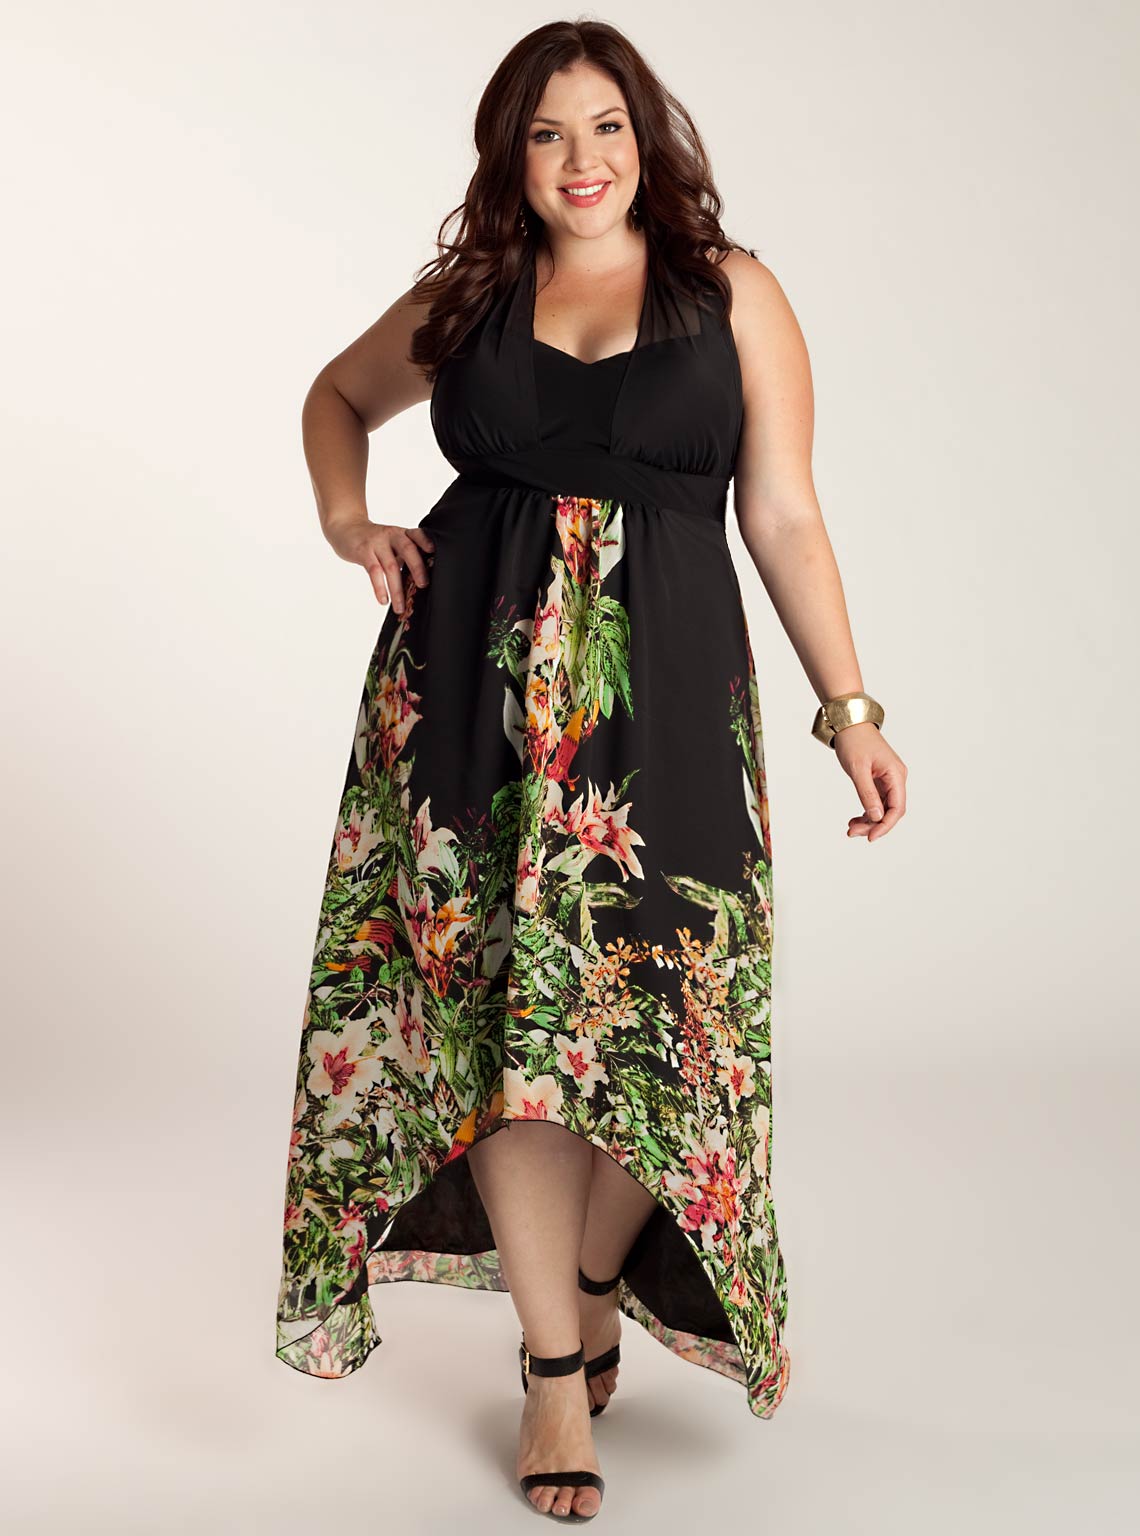 33 Plus Size Dresses For 2015 – The WoW Style